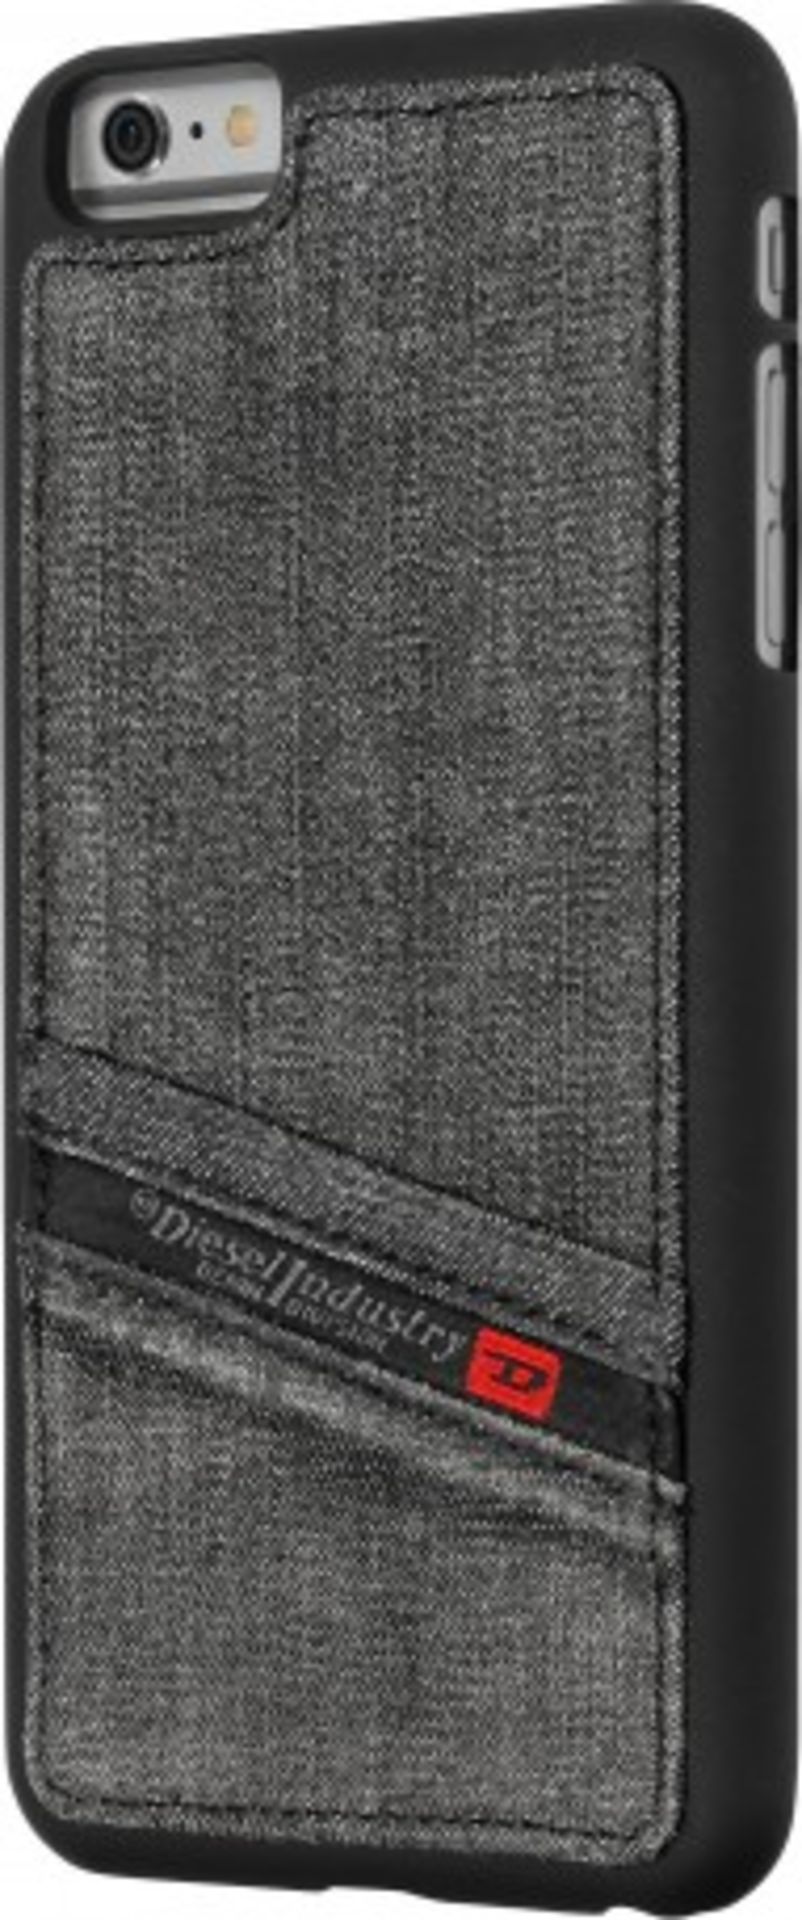 V Brand New Diesel Pluton Pocket Snap Case For iPhone 6/6S Black RRP £21.99 Amazon Price £19.43 X